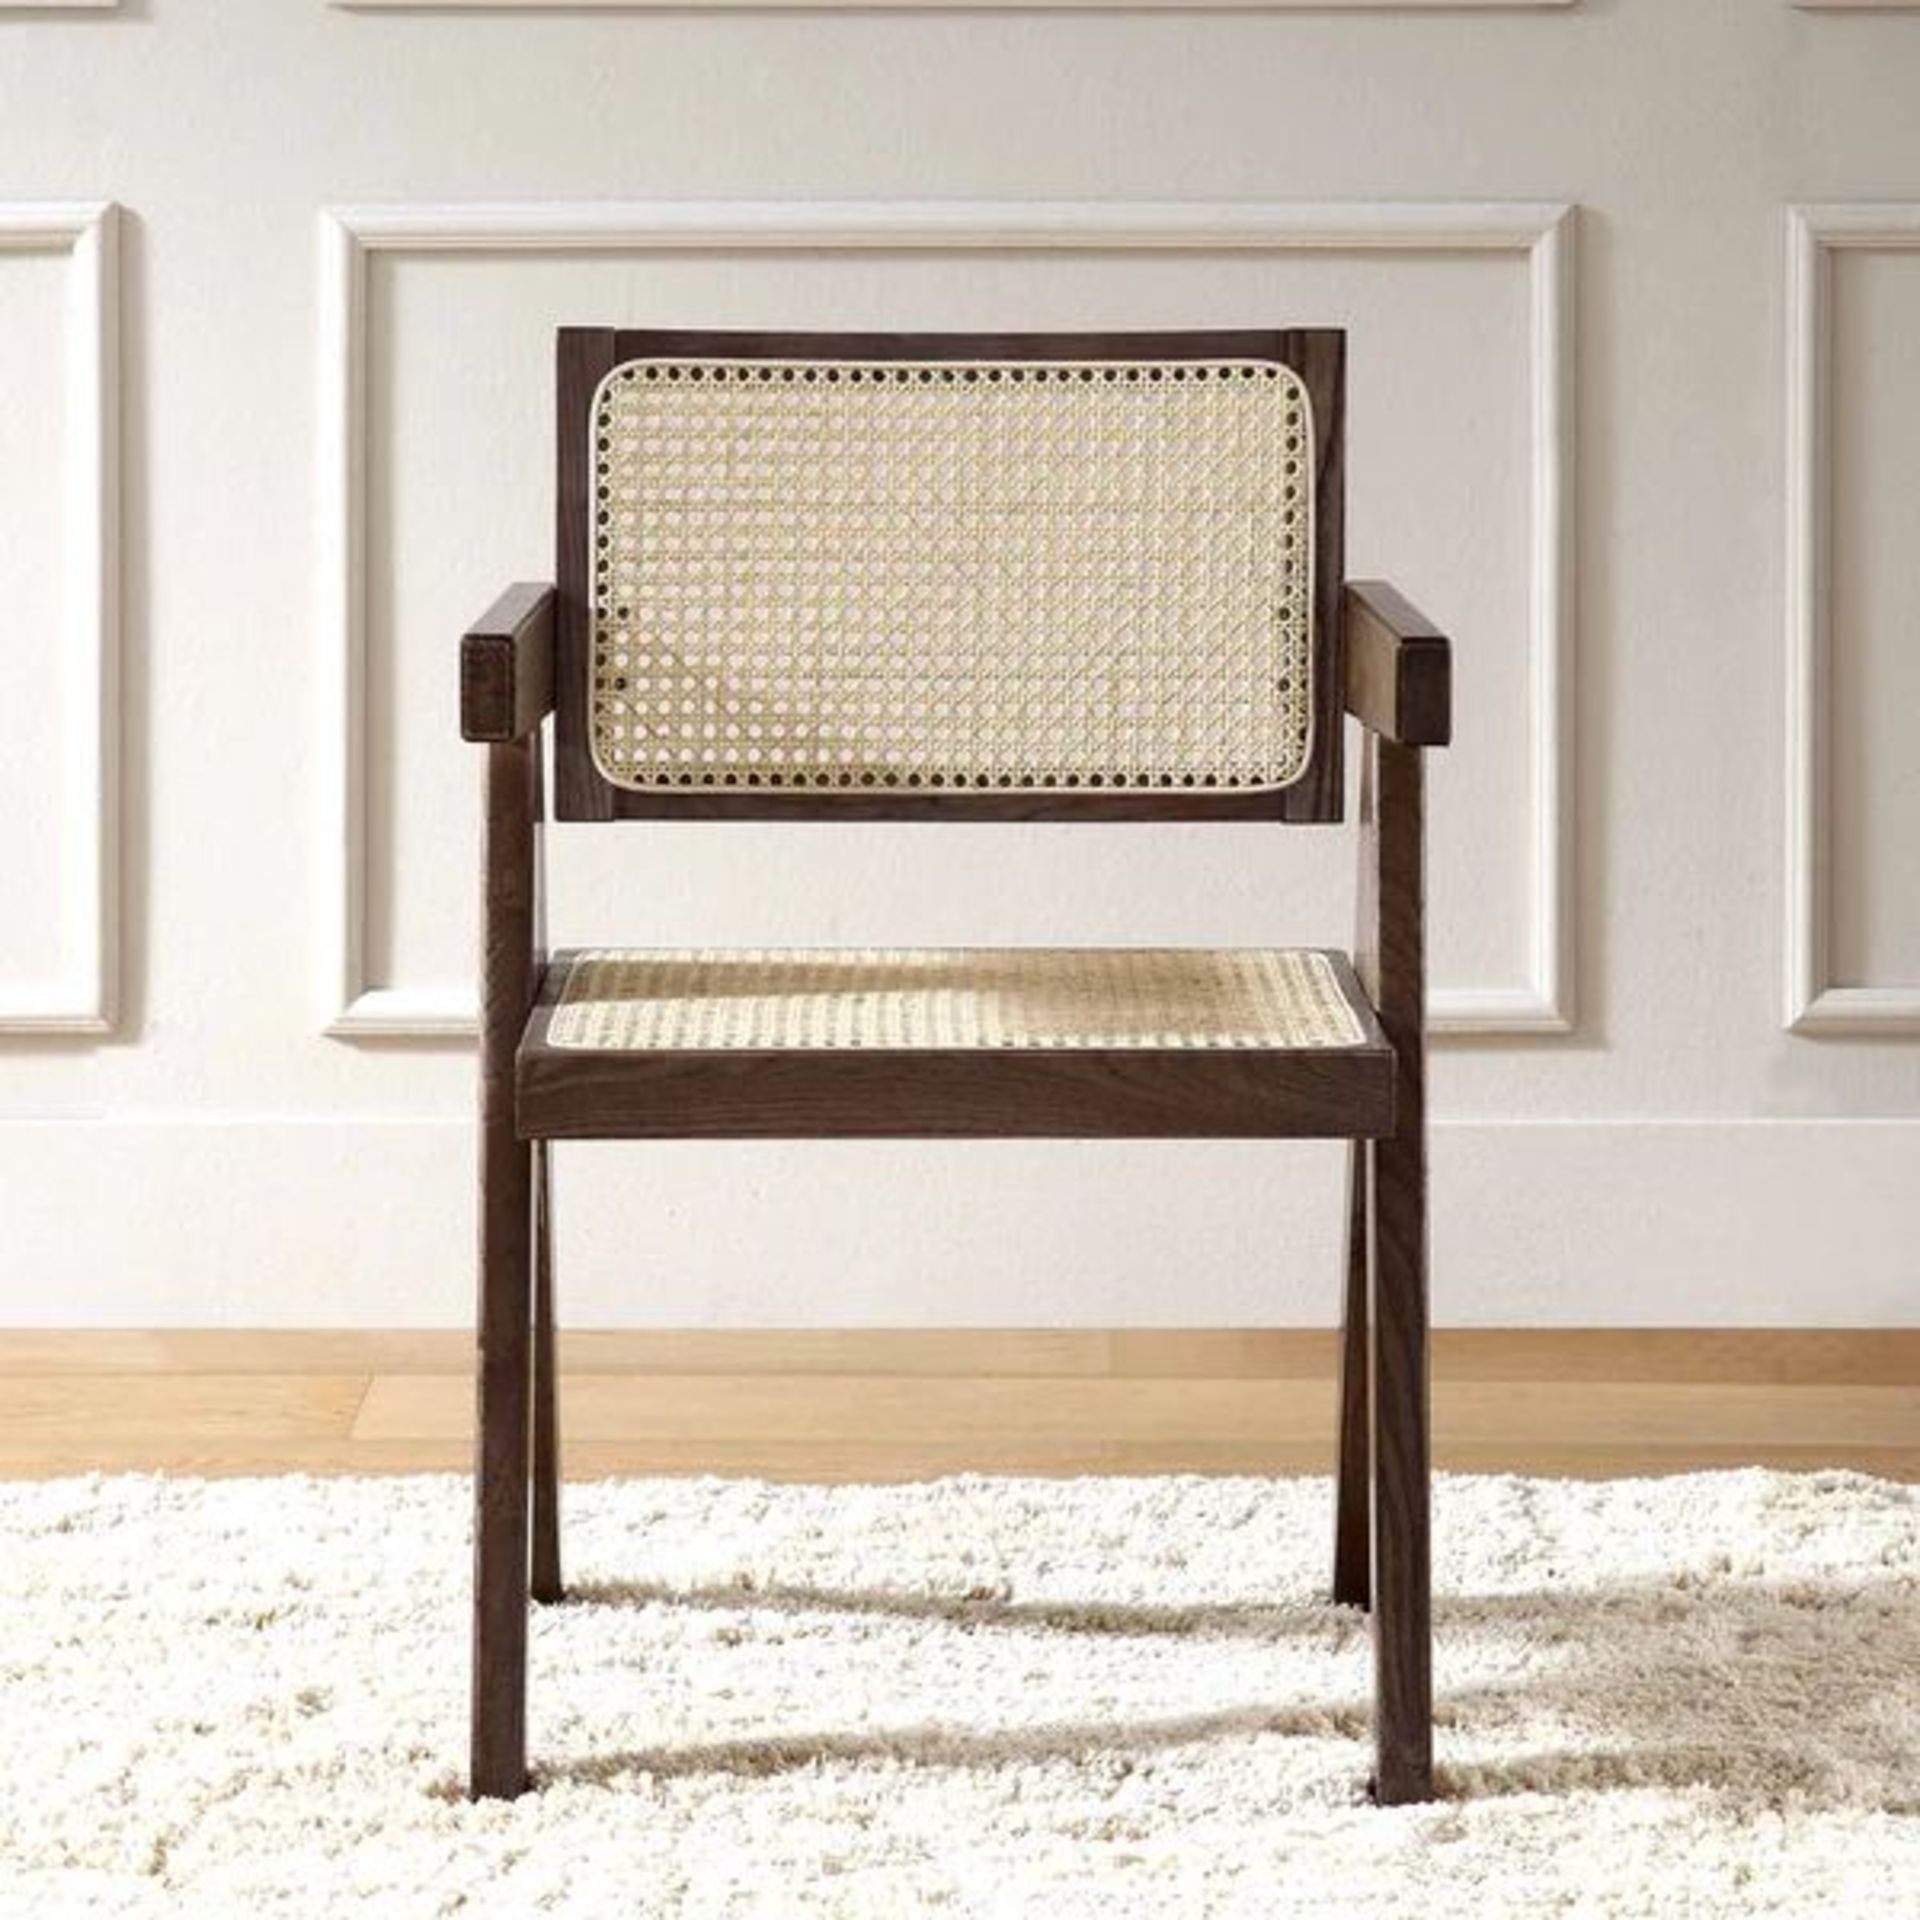 Jeanne Dark Walnut Cane Rattan Solid Beech Wood Dining Chair. - SR25. RRP £199.99. The cane rattan - Image 2 of 2